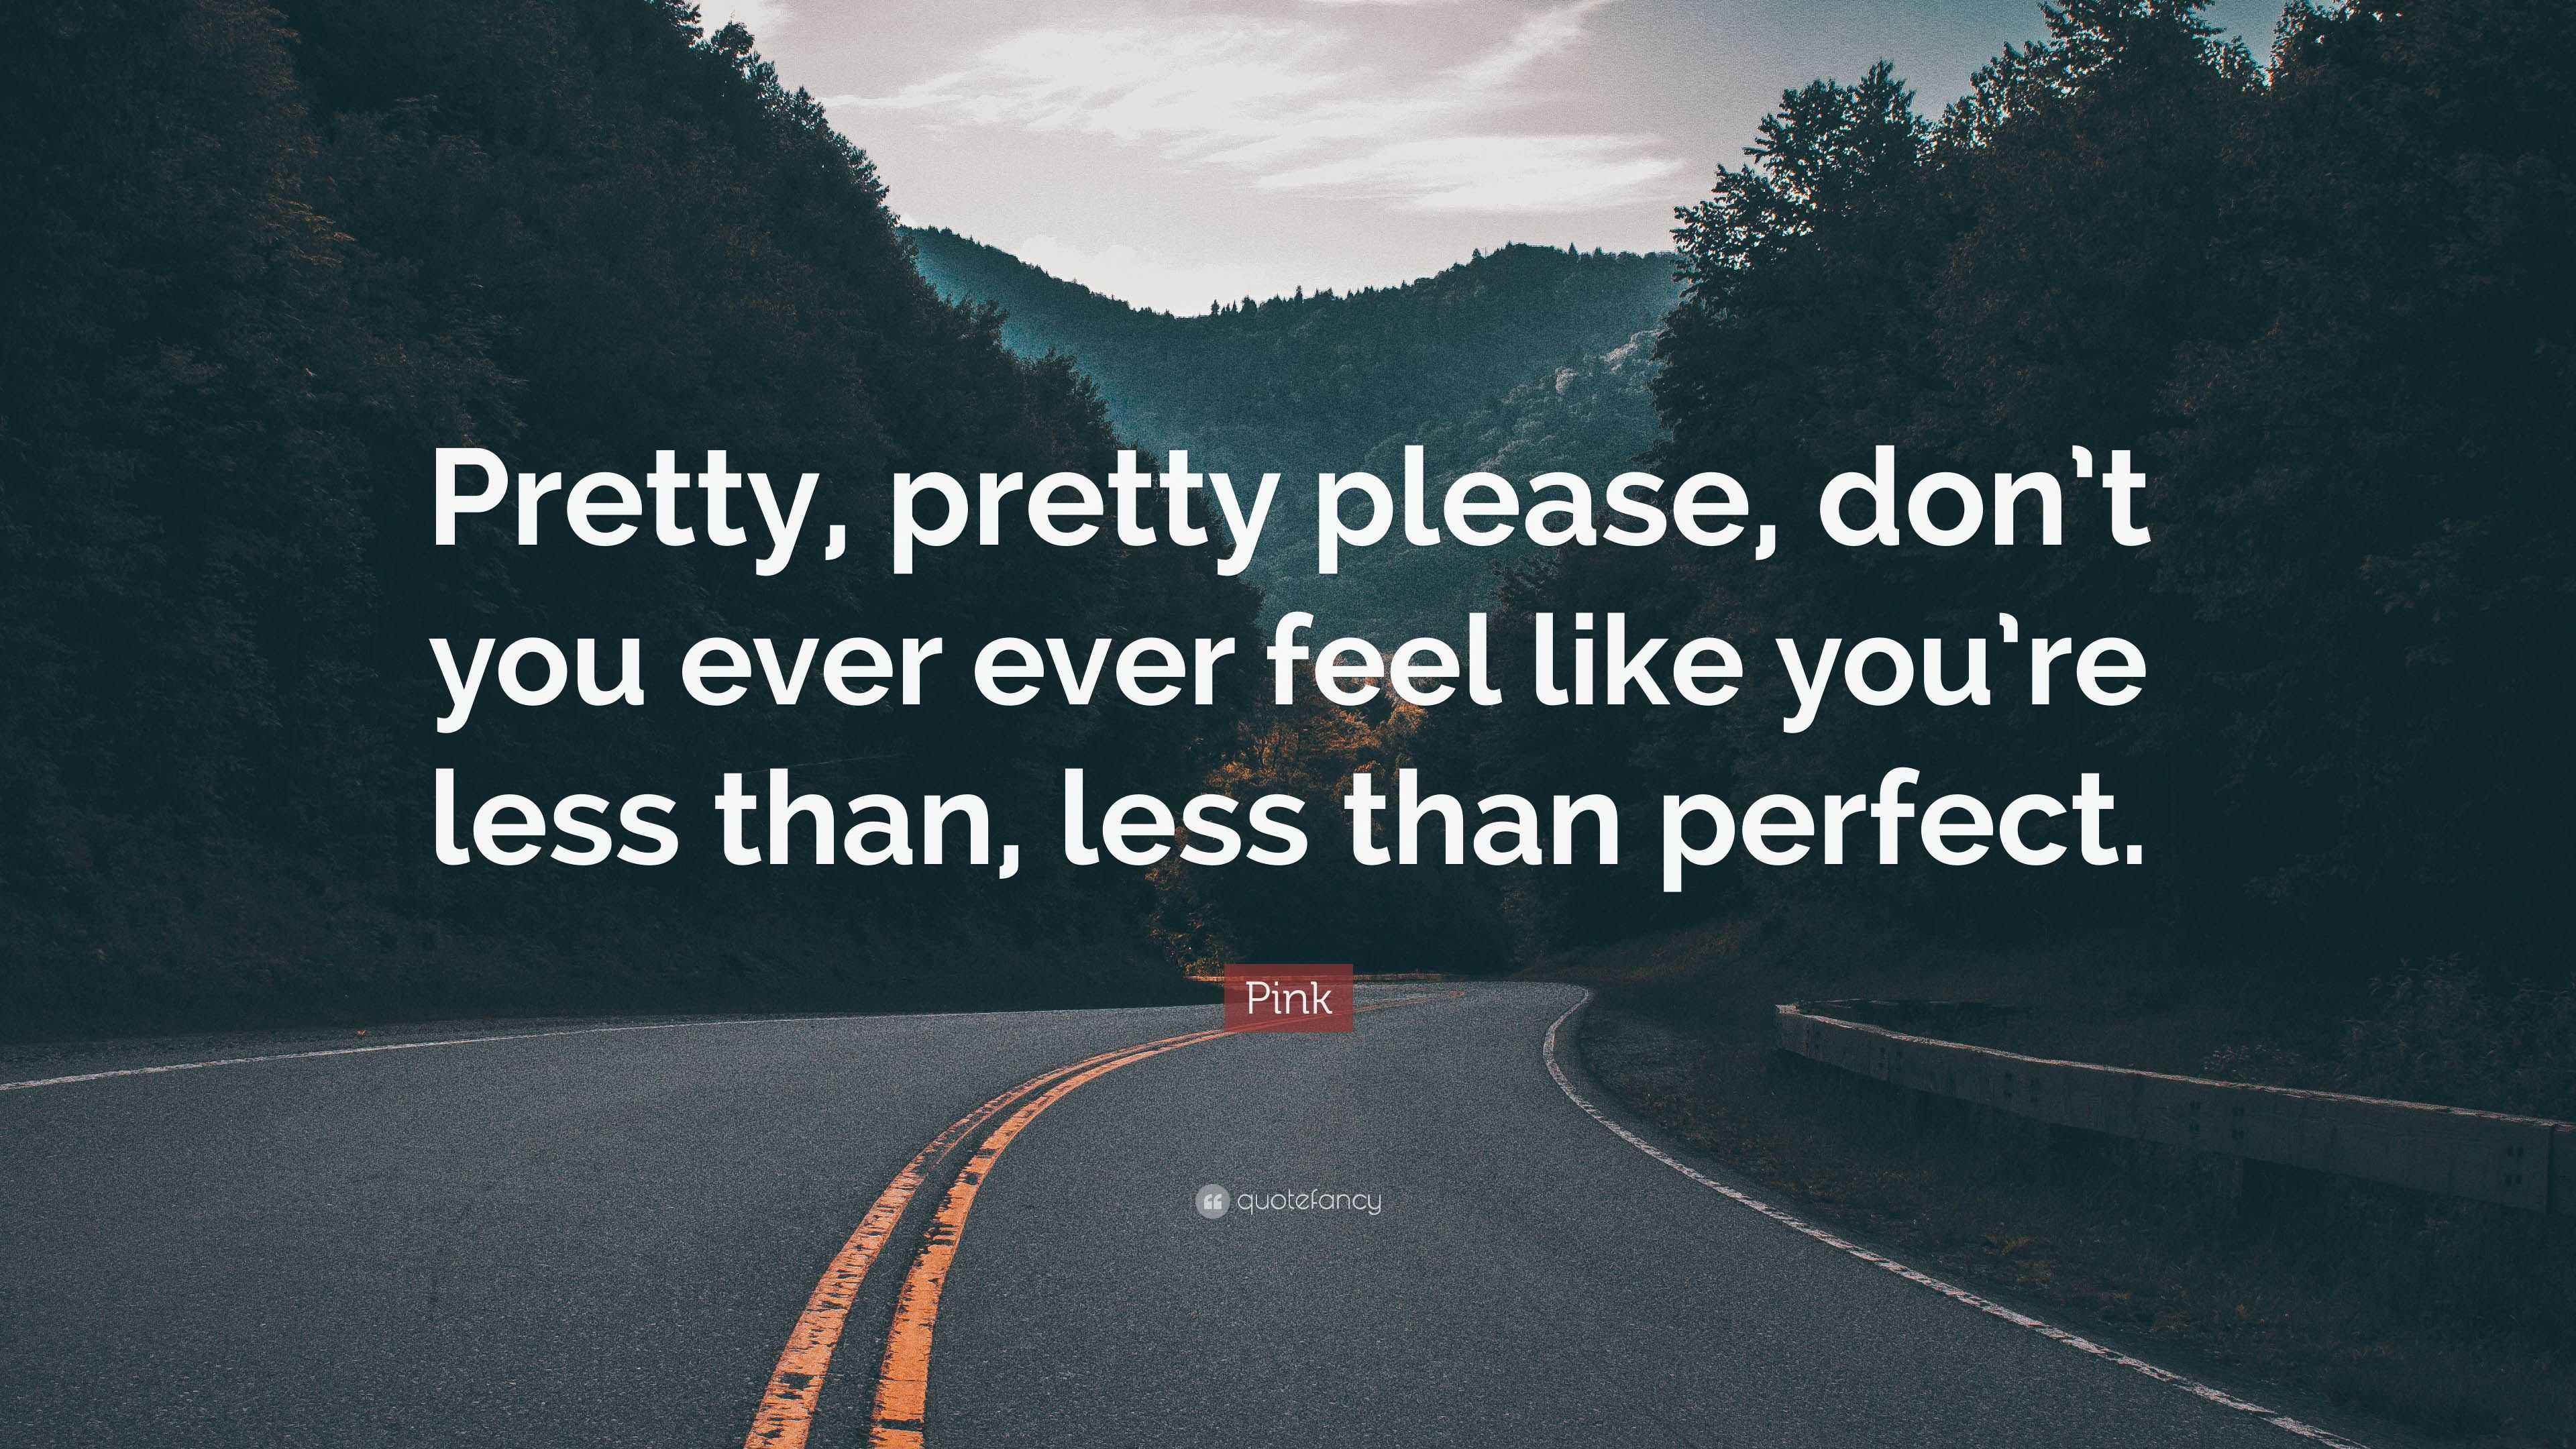 Pink Quote: “Pretty, pretty please, don’t you ever ever feel like you ...